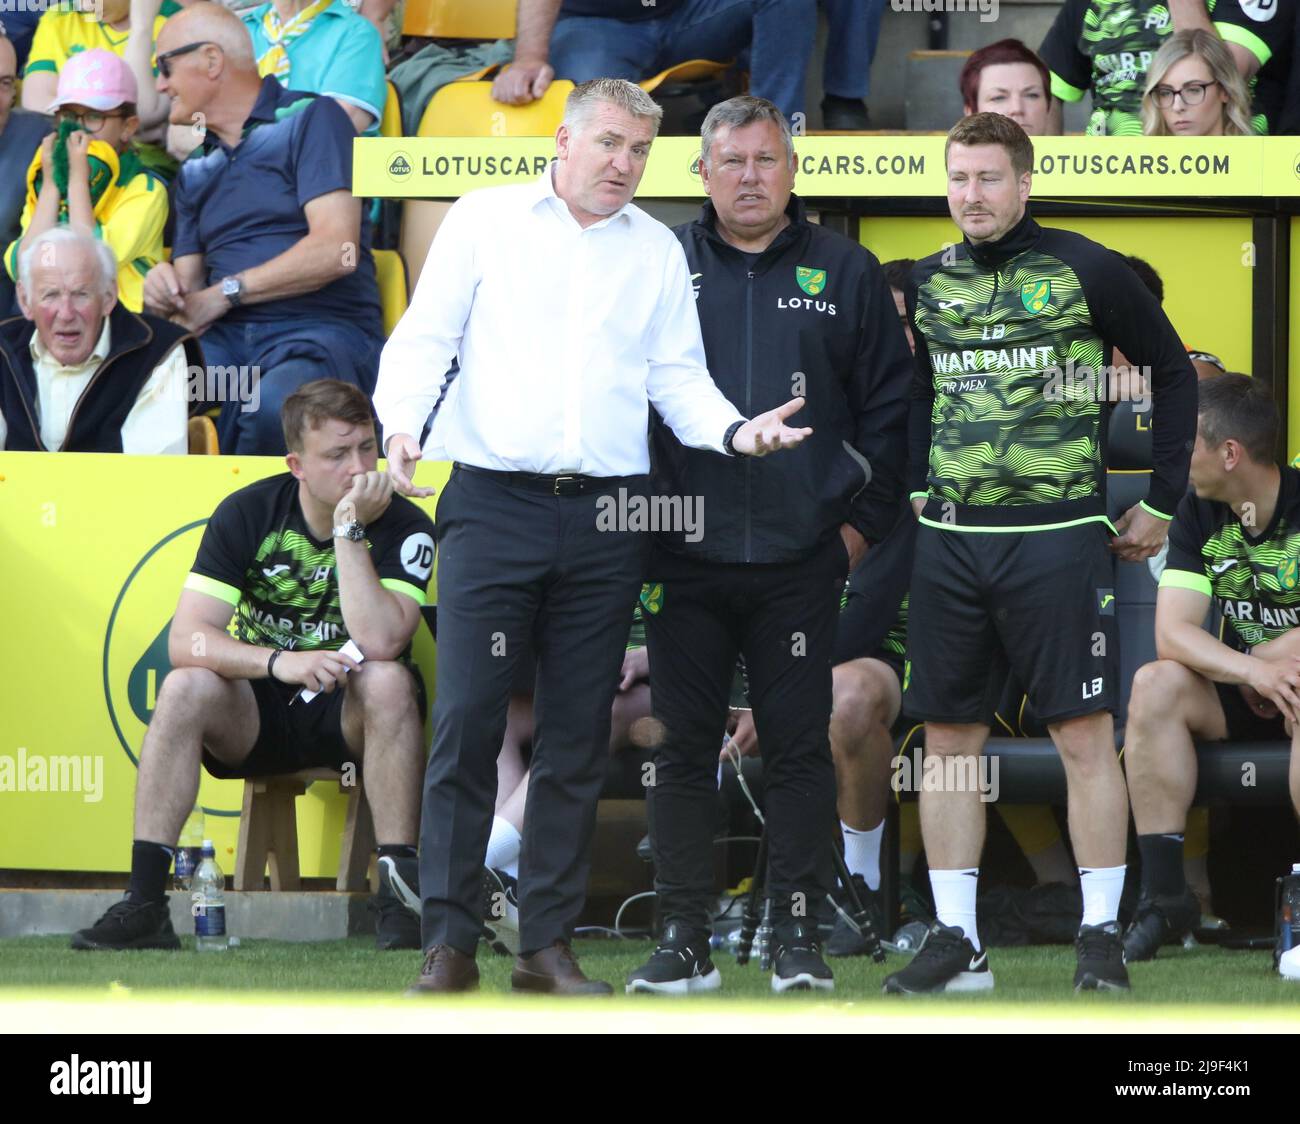 Norwich, UK. 22nd May, 2022. Dean Smith (Norwich manager) at the Norwich City v Tottenham Hotspur, English Premier League match, at Carrow Road, Norwich. Credit: Paul Marriott/Alamy Live News Stock Photo